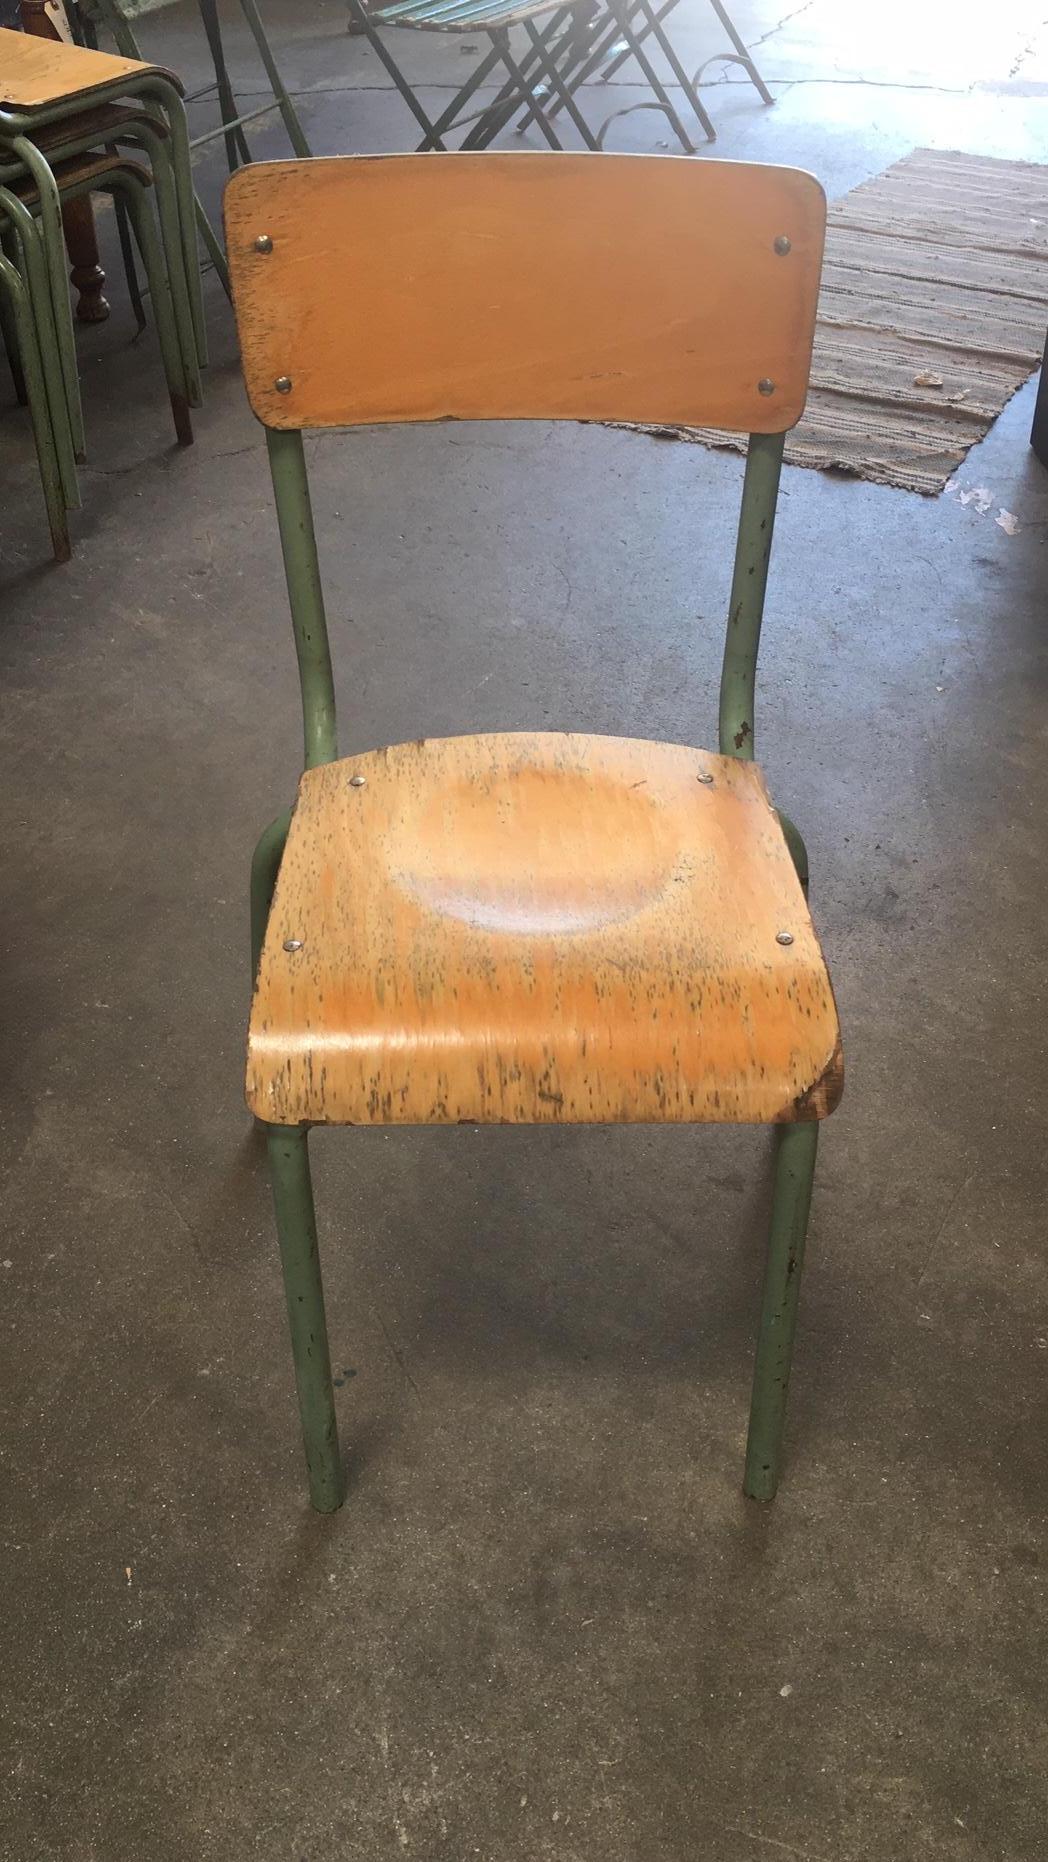 Vintage French school chairs made of wood and metal- a set of 4.